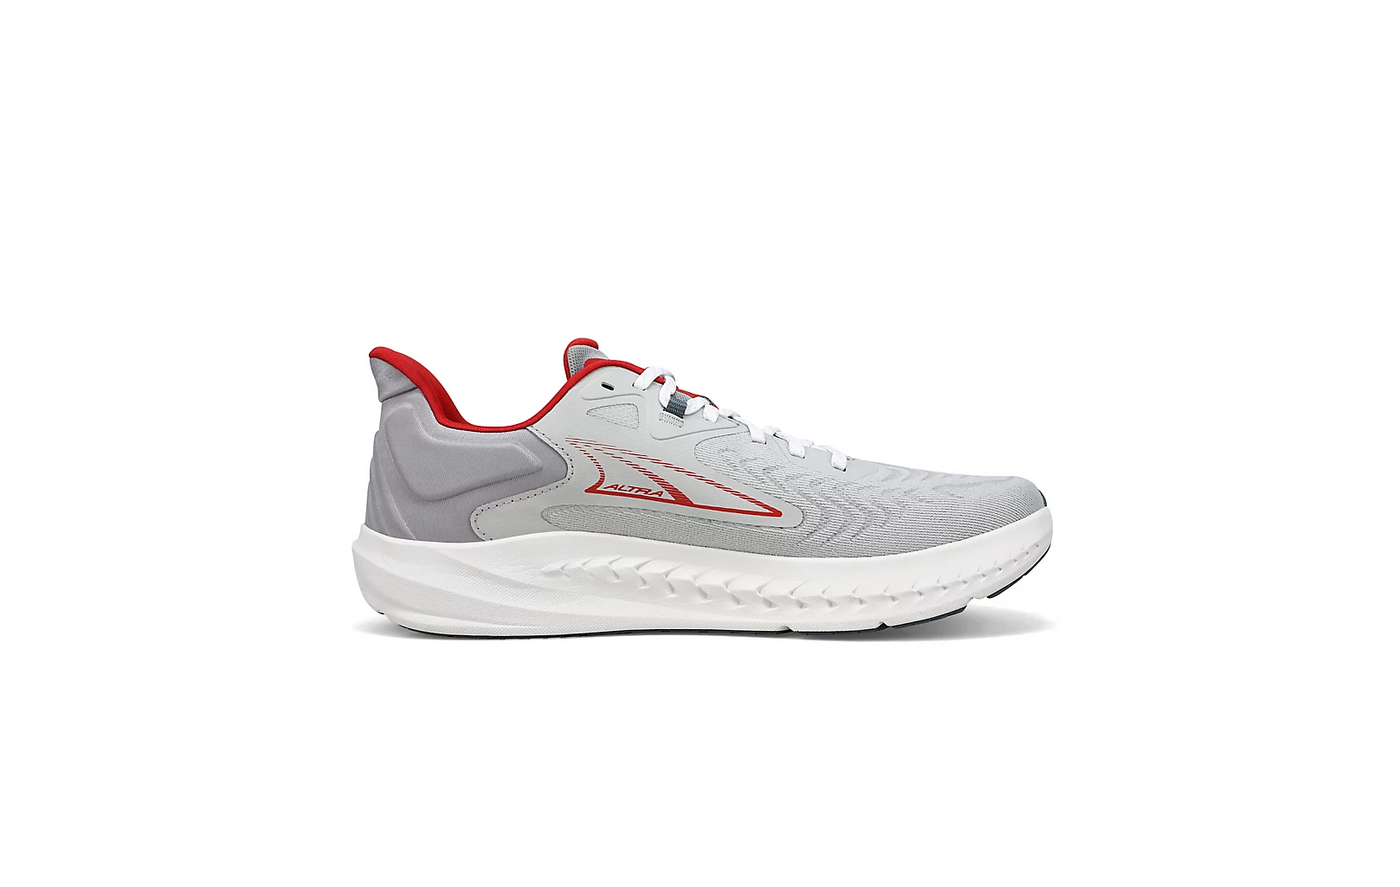 ALTRA MENS TORIN 7 - GRAY/RED